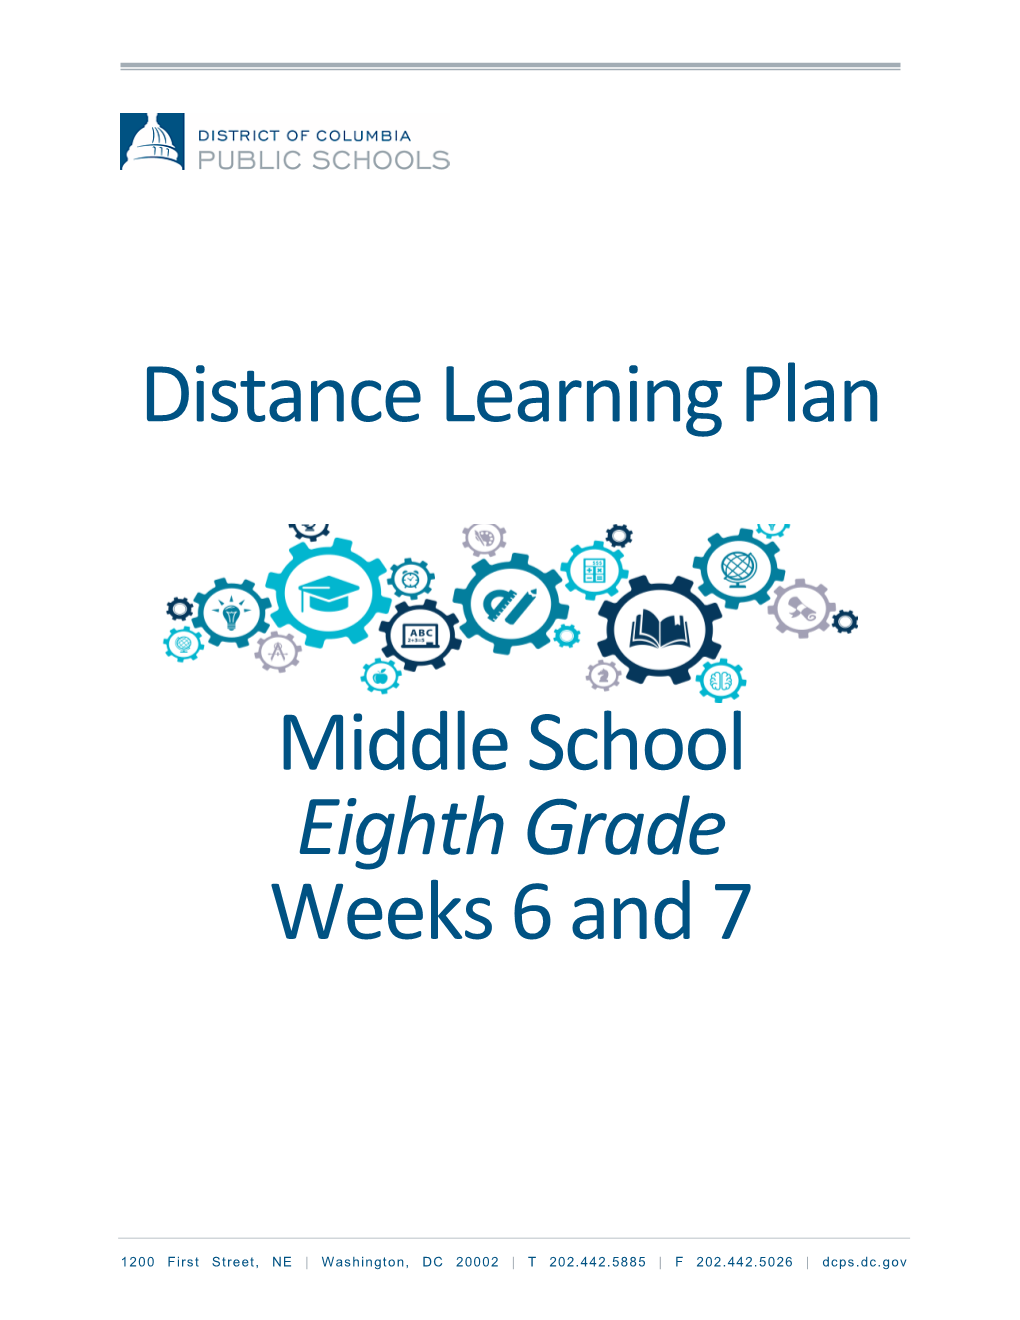 Distance Learning Plan Middle School Eighth Grade Weeks 6 and 7